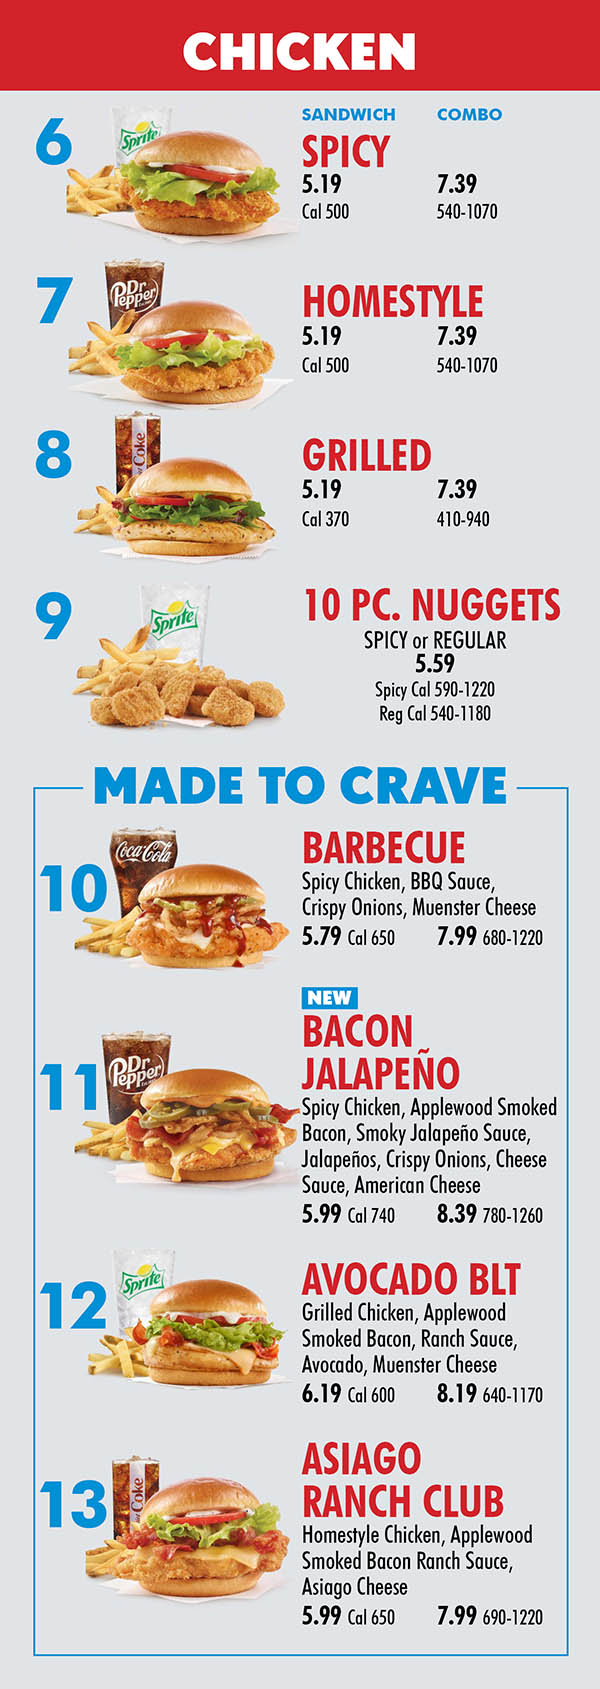 Wendy's N 27th St Lincoln NE Menu Page 2
CHICKEN
6
MADE TO CRAVE
10
11
12
7
8
SANDWICH COMBO
SPICY
5.19 7.39
Cal 500 540-1070
HOMESTYLE
5.19 7.39
Cal 500 540-1070
GRILLED
5.19 7.39
Cal 370 410-940
10 PC. NUGGETS
SPICY or REGULAR
5.59
Spicy Cal 590-1220
Reg Cal 540-1180
BARBECUE
Spicy Chicken, BBQ Sauce,
Crispy Onions, Muenster Cheese
5.79 Cal 650 7.99 680-1220
BACON
JALAPEÑO
Spicy Chicken, Applewood Smoked Bacon, Smoky Jalapeño Sauce, Jalapeños, Crispy Onions, Cheese Sauce, American Cheese
5.99 Cal 740 8.39 780-1260
AVOCADO BLT
Grilled Chicken, Applewood
Smoked Bacon, Ranch Sauce,
Avocado, Muenster Cheese
6.19 Cal 600 8.19 640-1170
ASIAGO
RANCH CLUB
Homestyle Chicken, Applewood
Smoked Bacon Ranch Sauce,
Asiago Cheese
5.99 Cal 650 7.99 690-1220